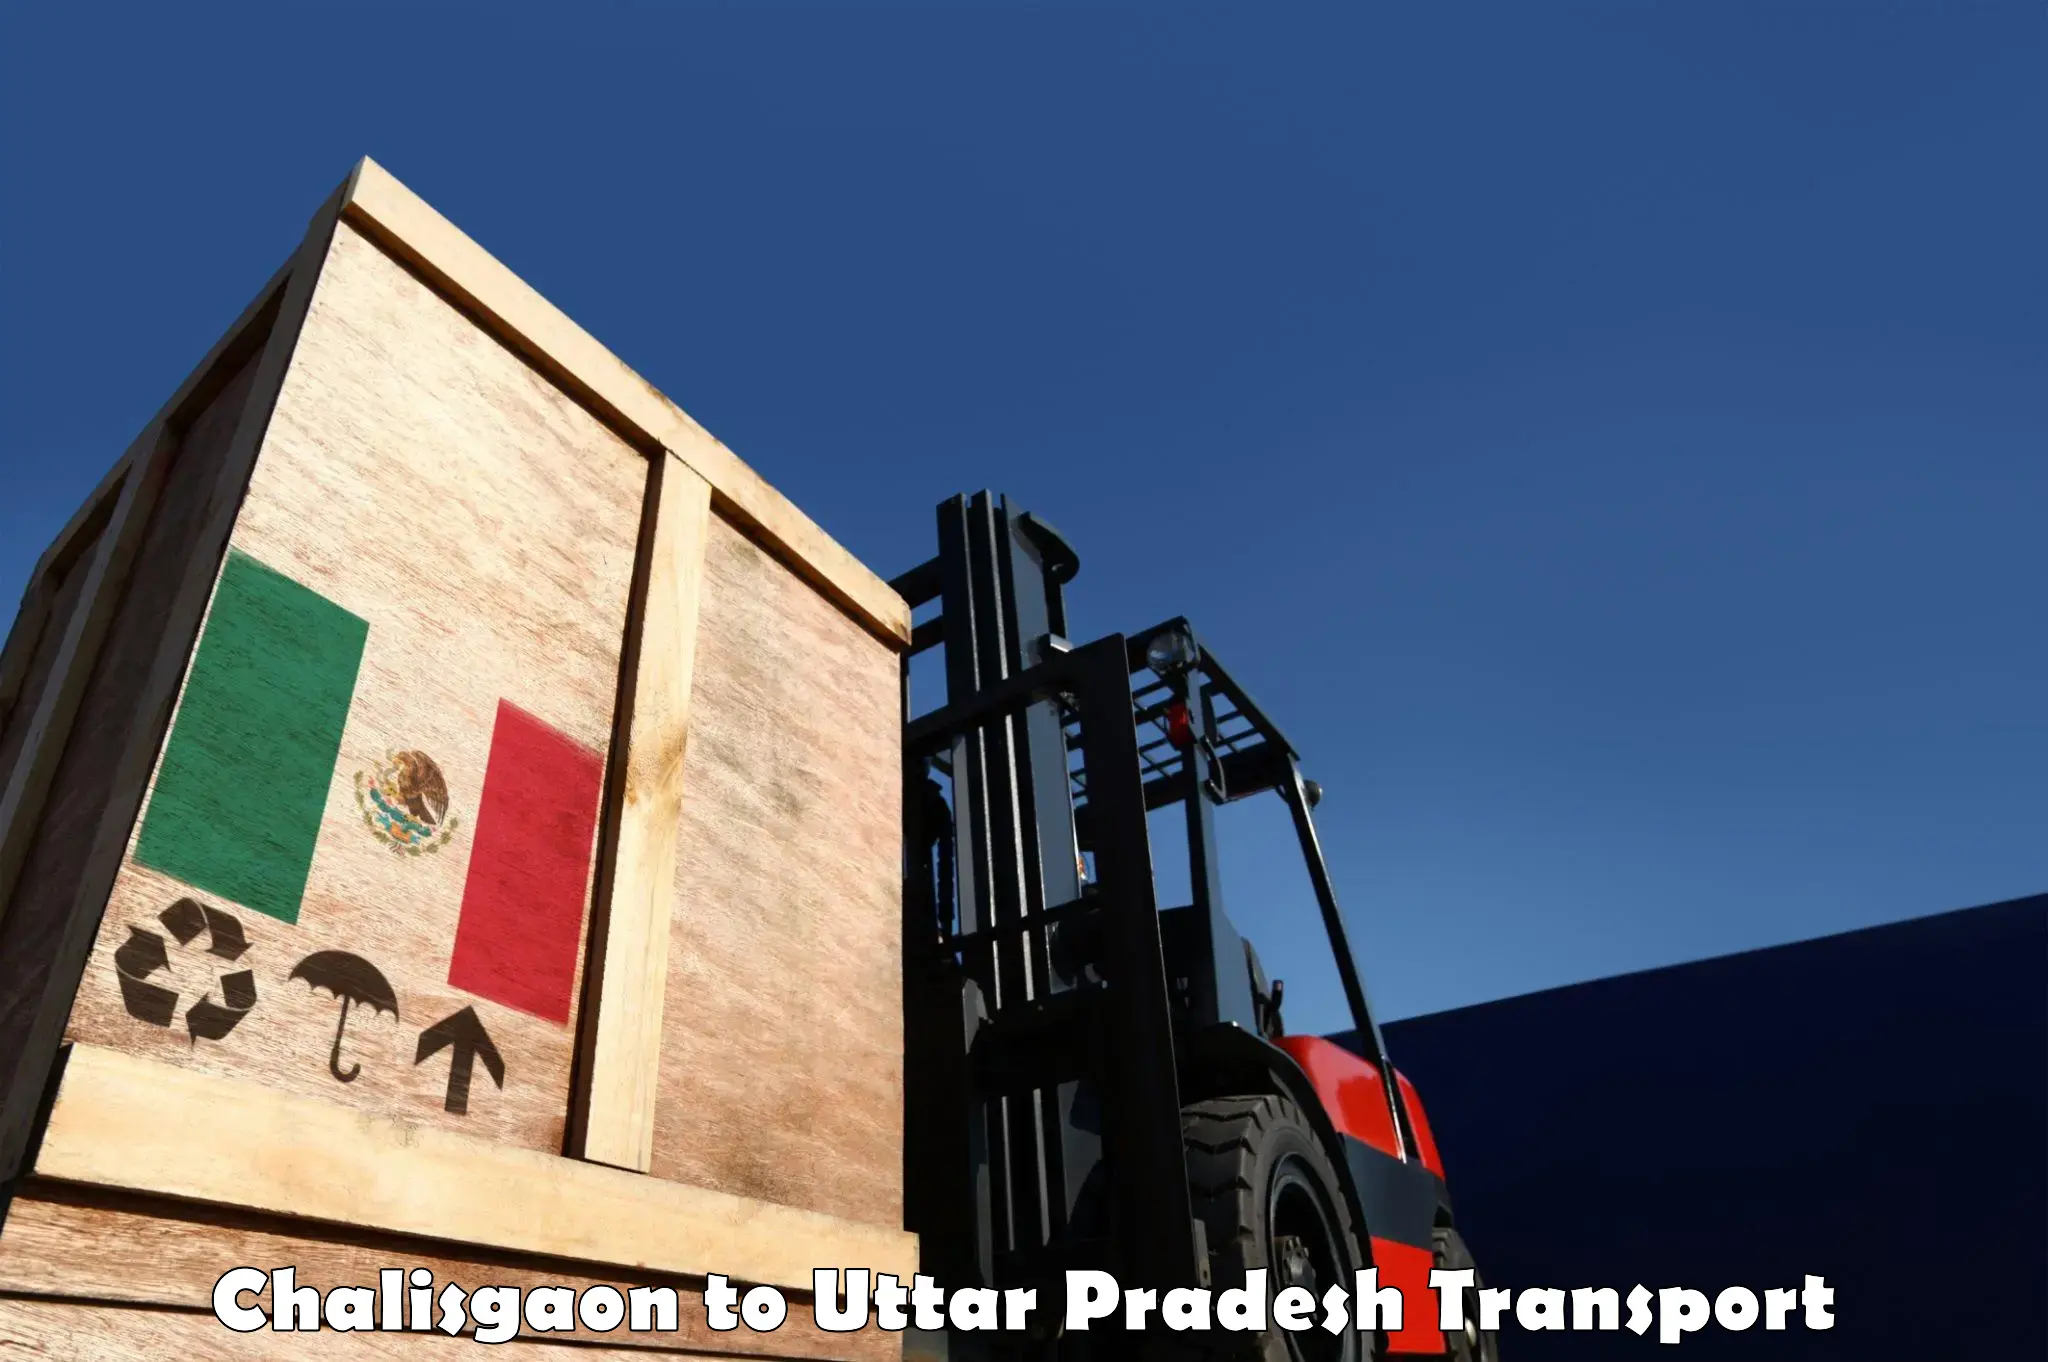 Cargo transport services in Chalisgaon to Amethi